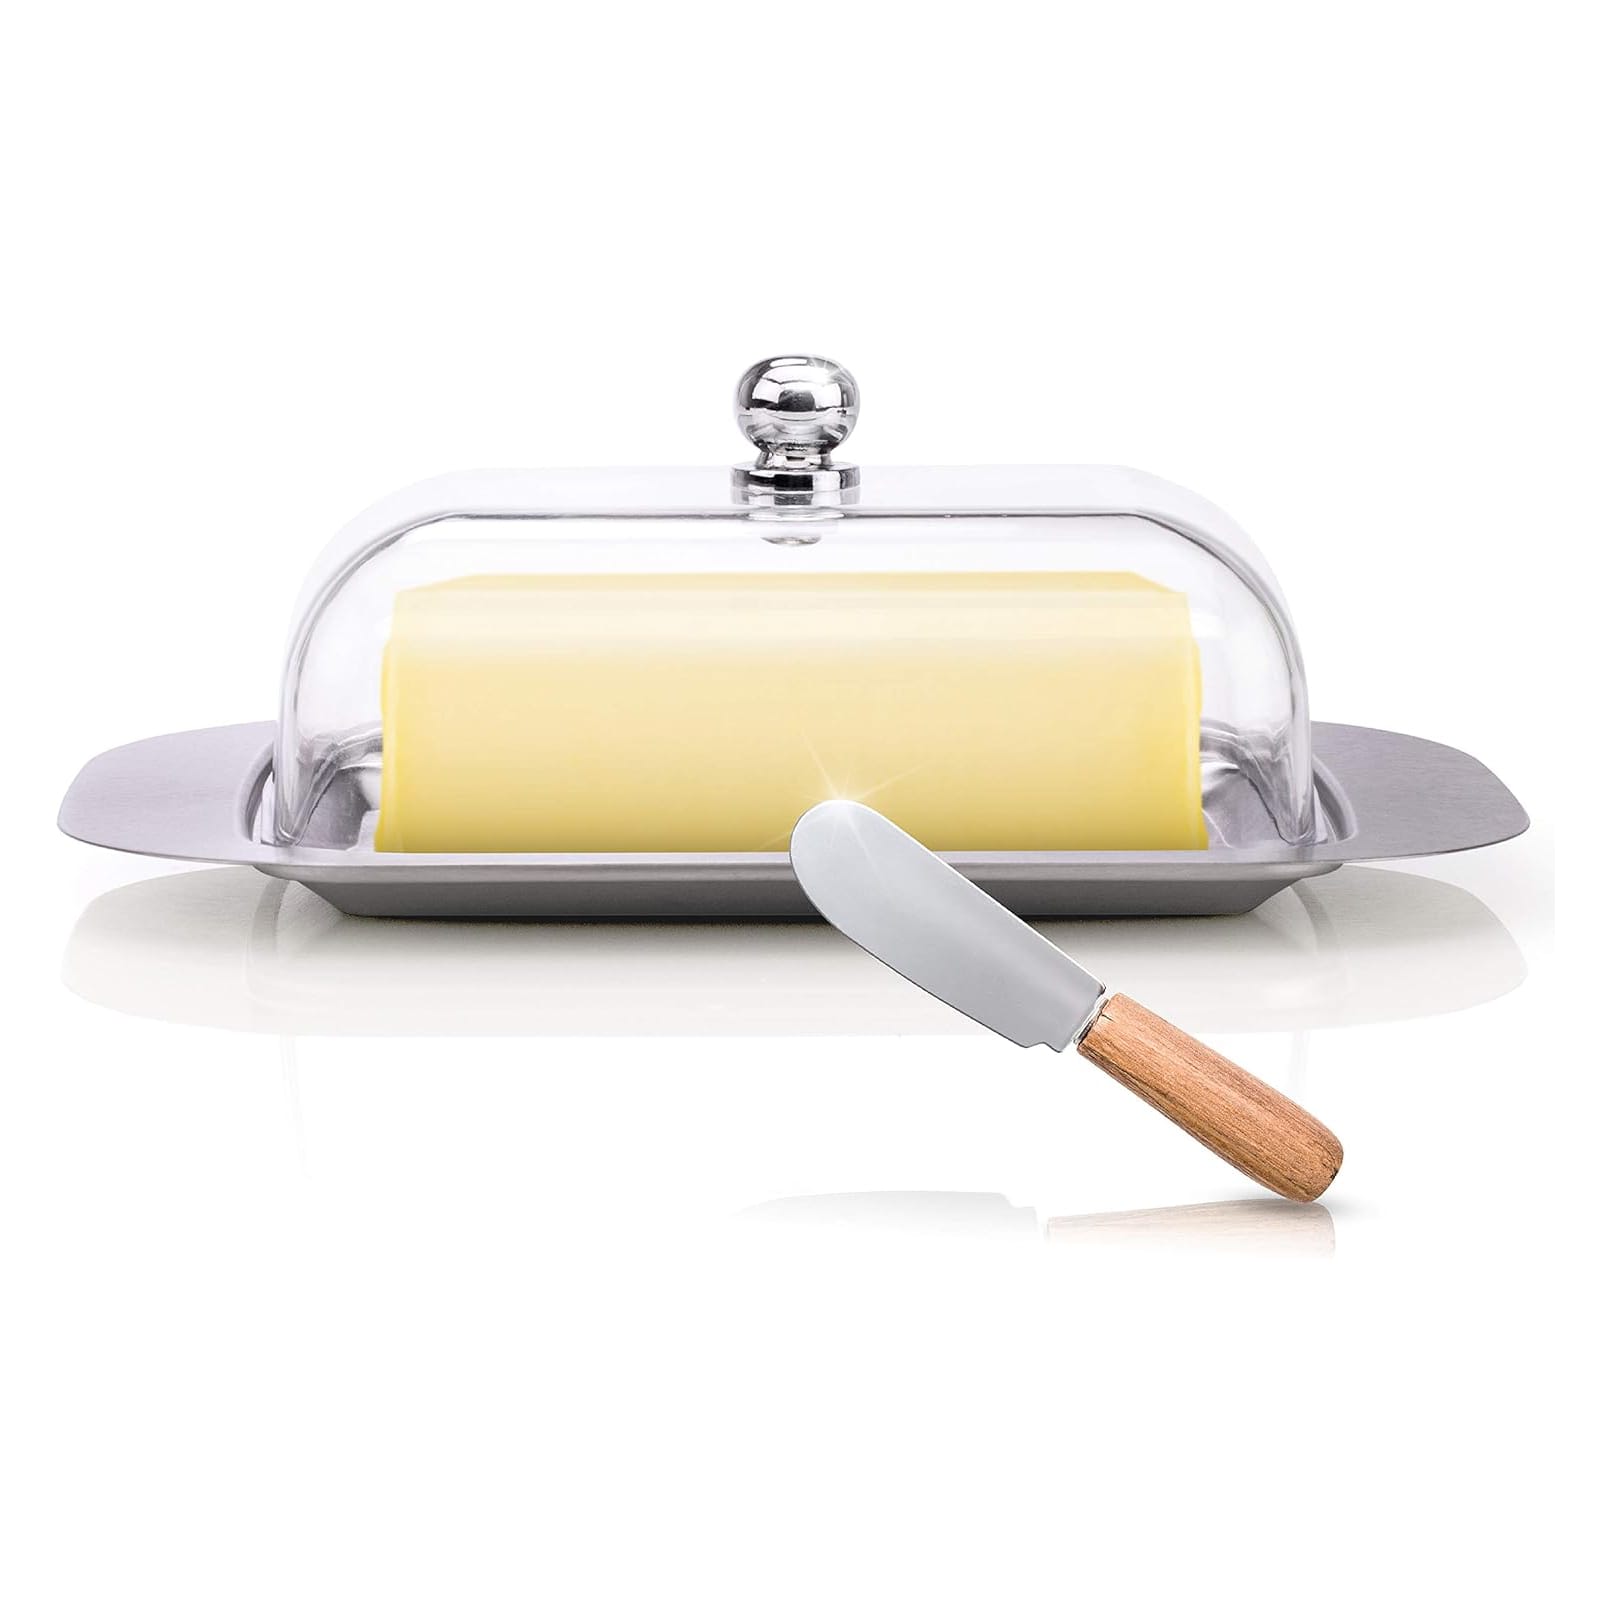 Best Butter Dish on